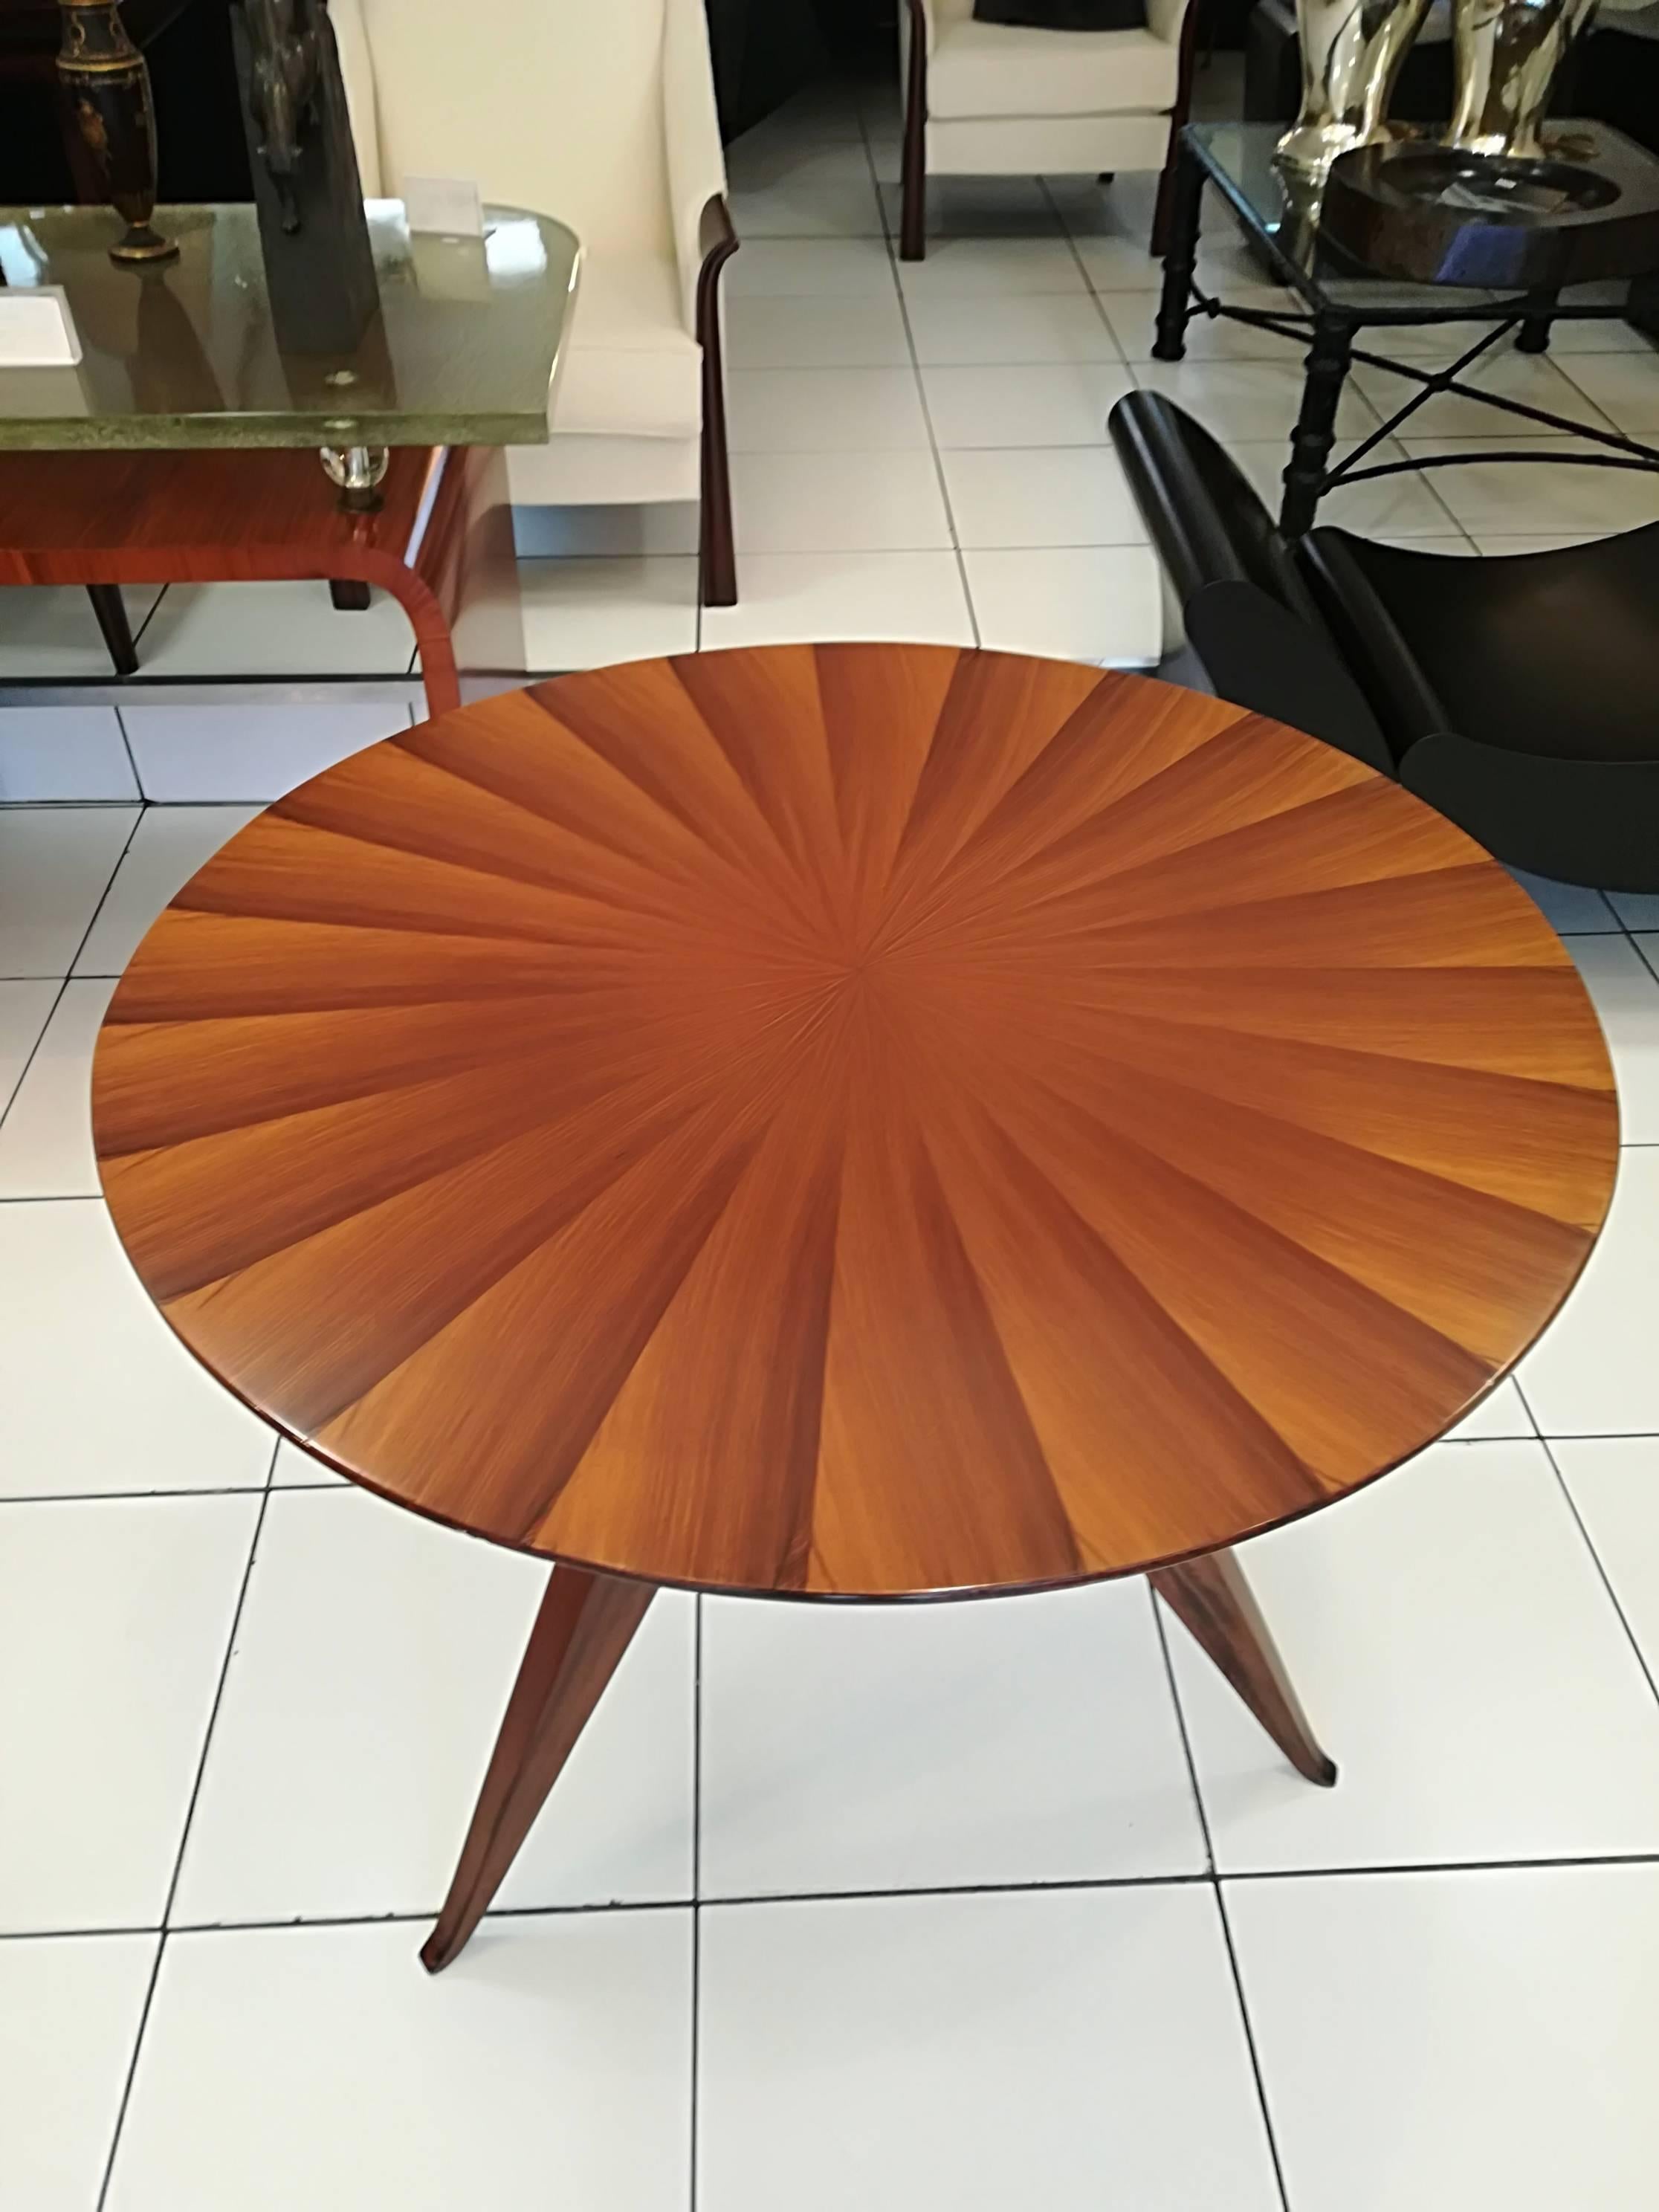 An elegant tripod table With wood grain pattern radiating from the centre on tabletop,

Manufactured by Porteneuve, Rulhmann Model Ducharne, unsigned.
 